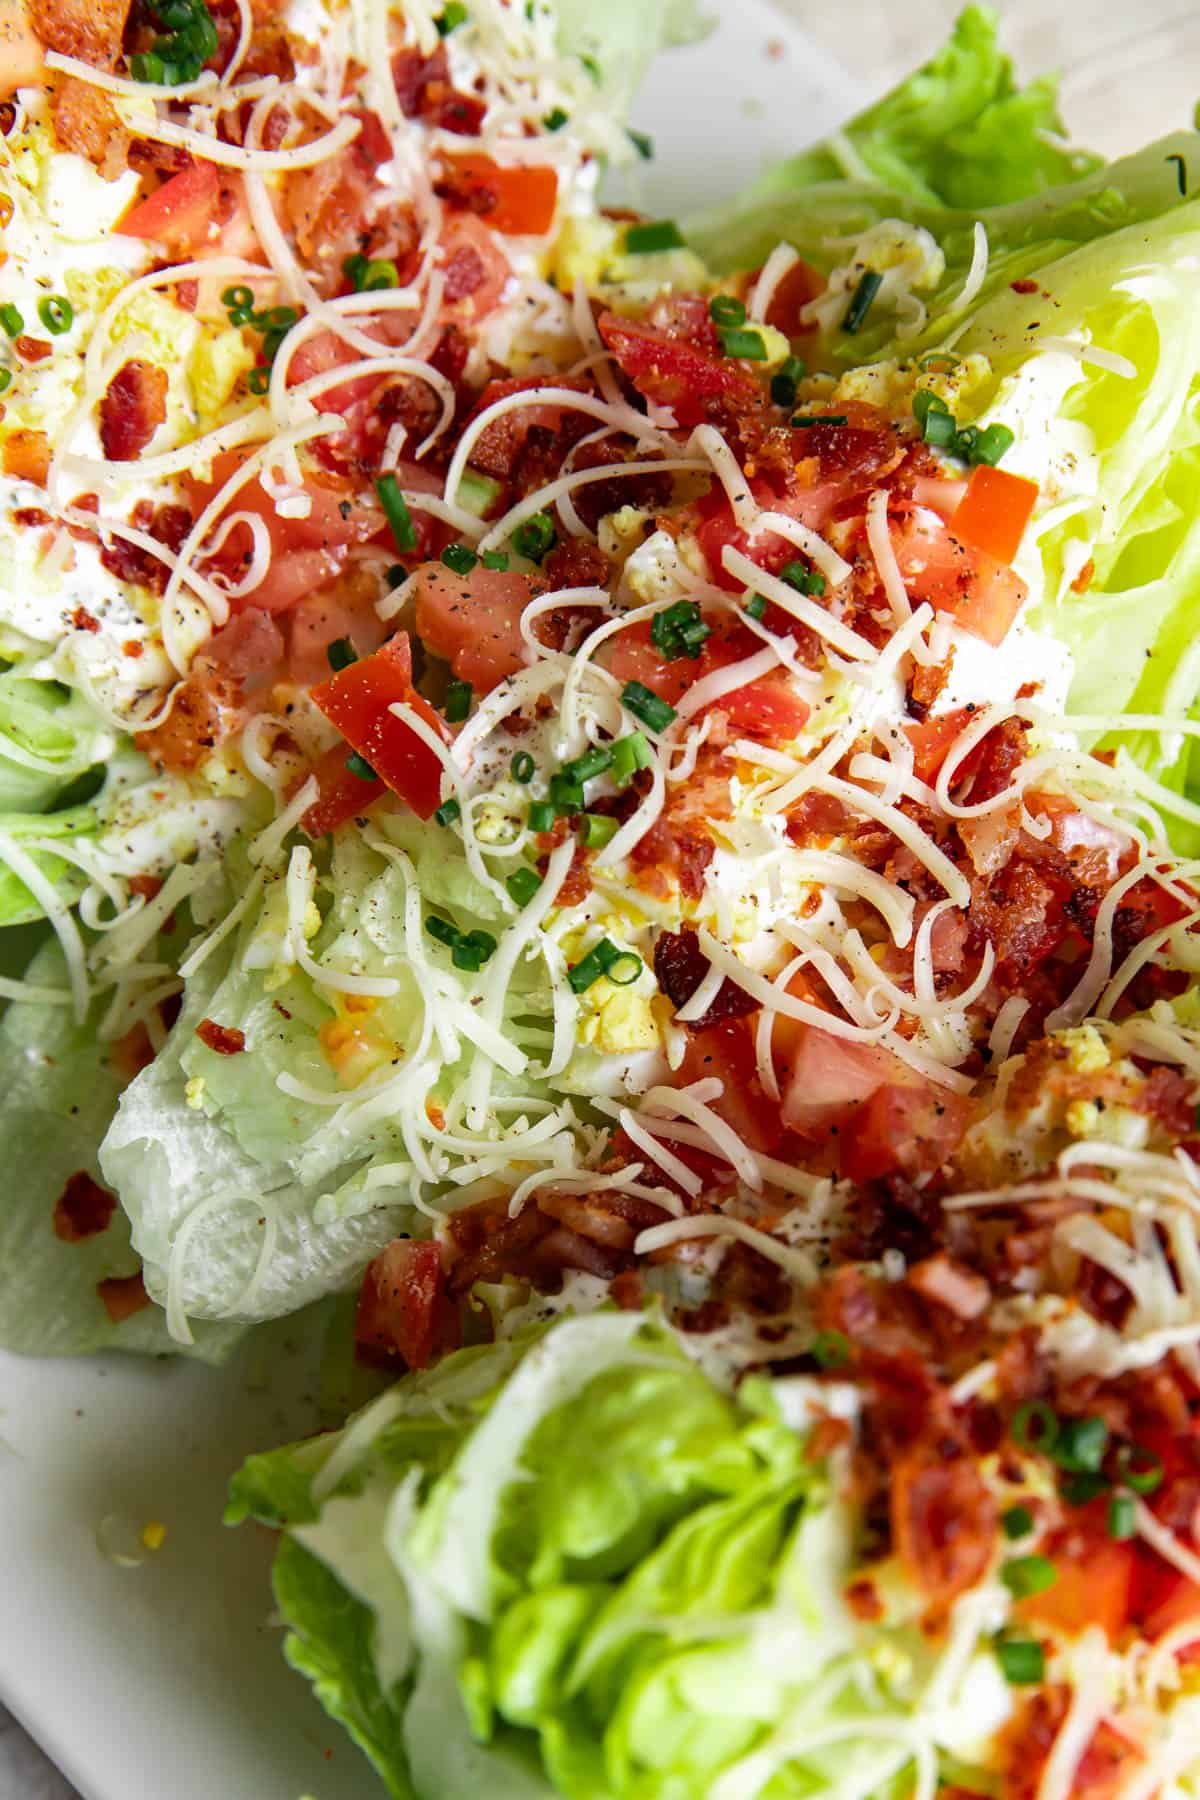 blt wedge salad on a plate.